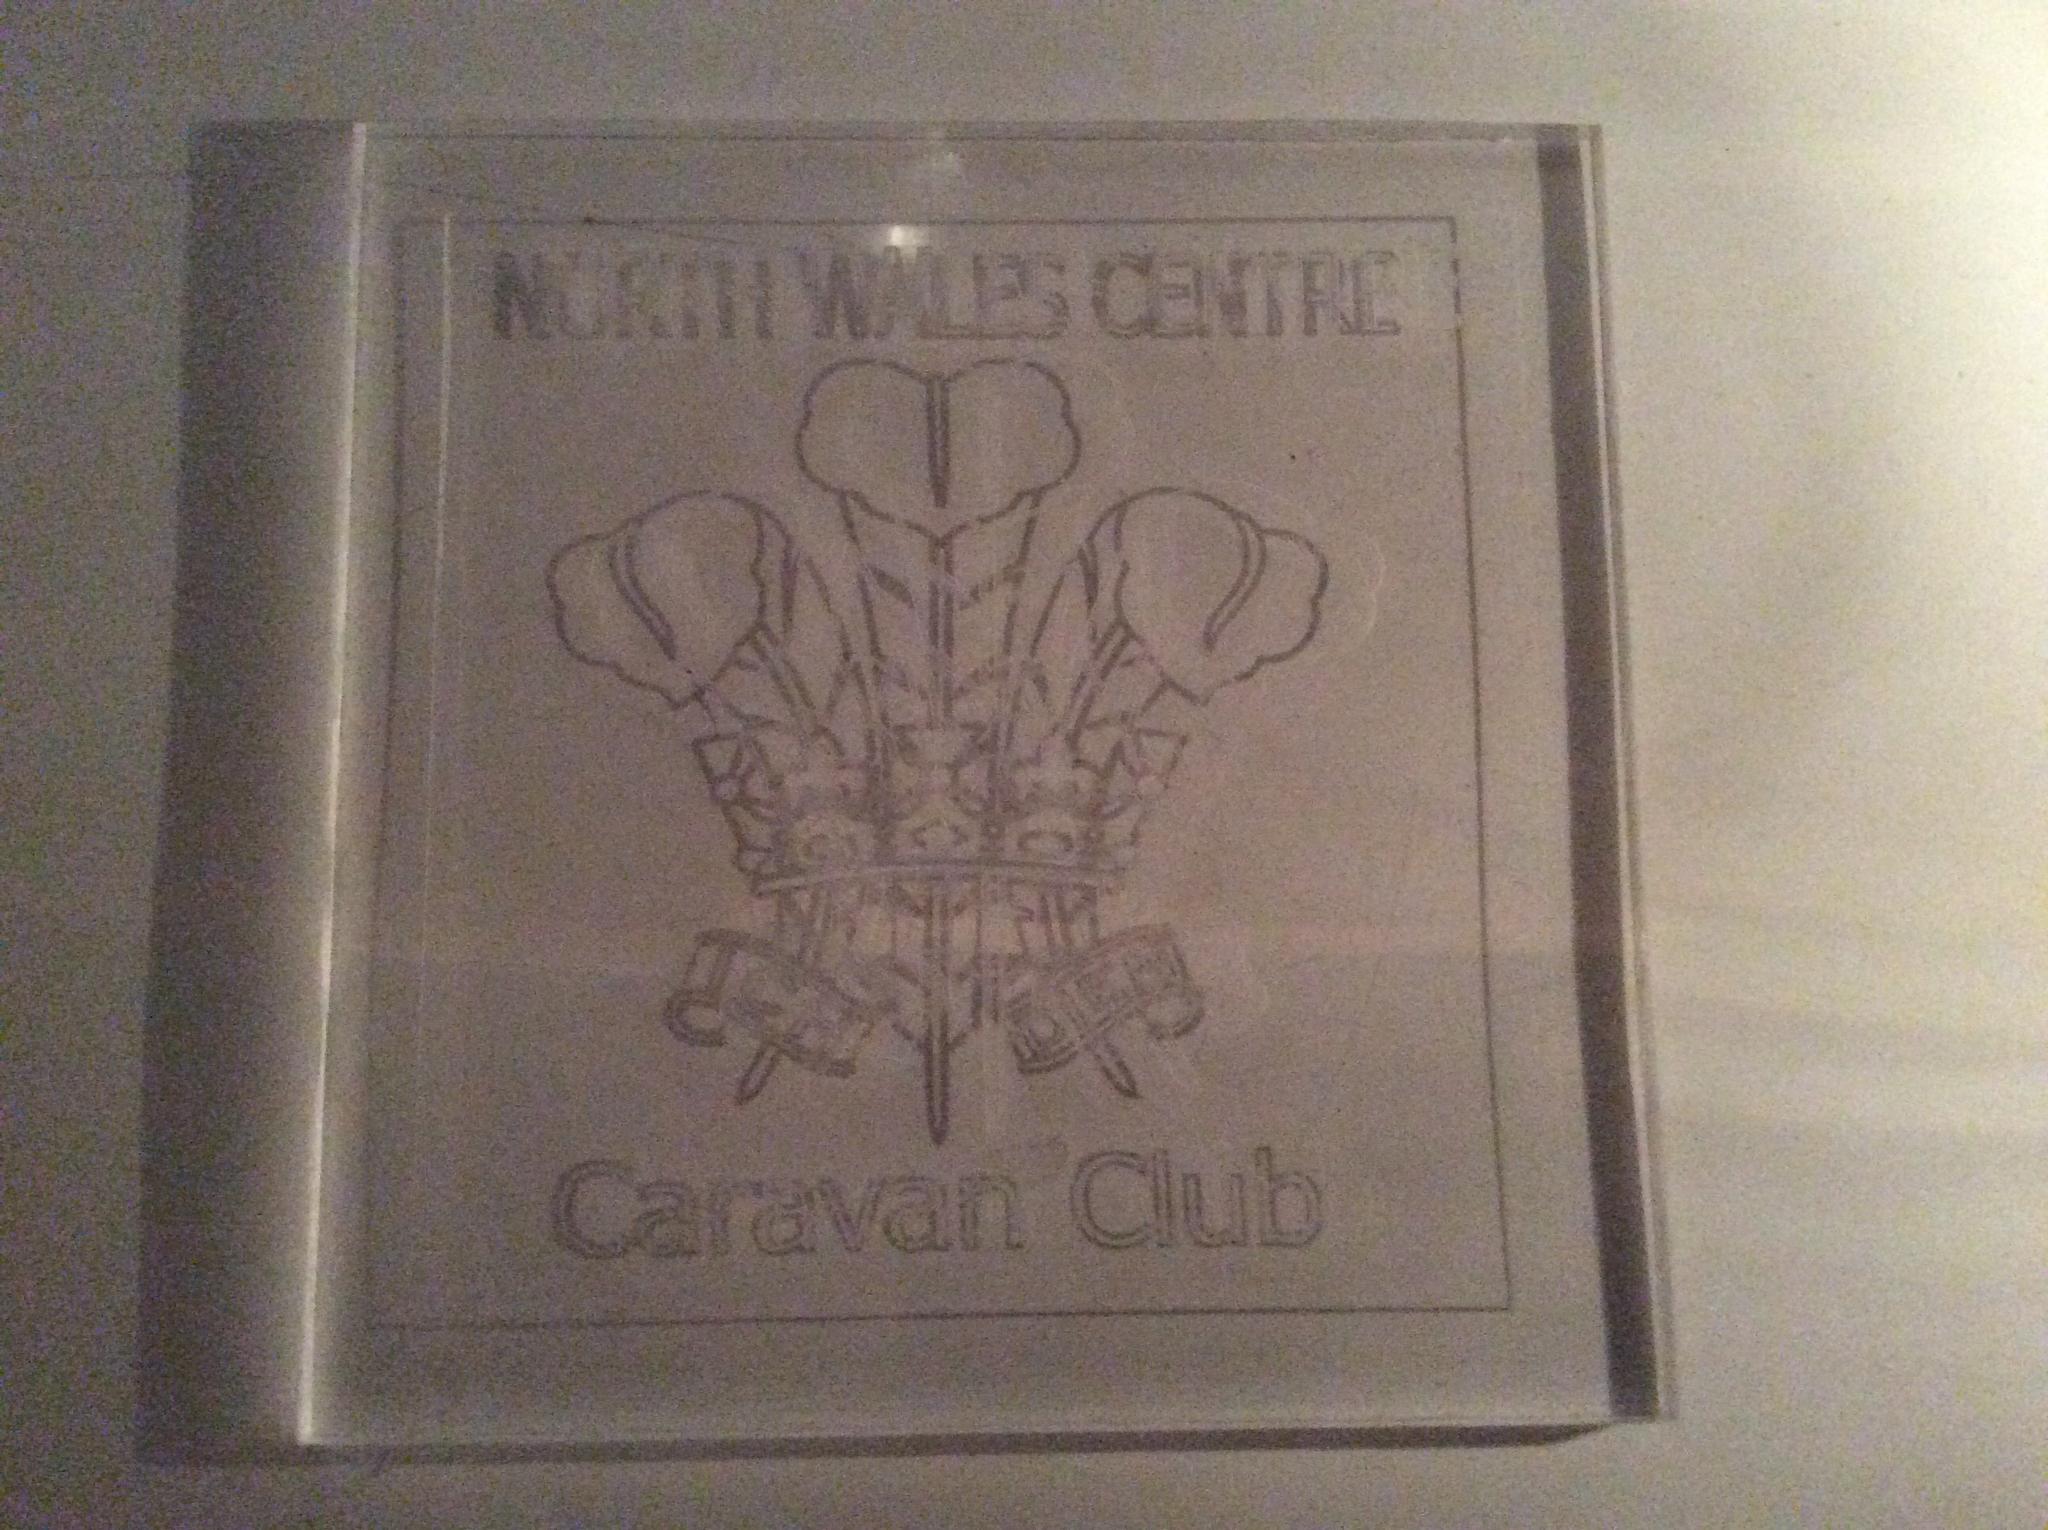 A 5mm piece of clear acrylic approx 110mm square
Engraved 0.3 mm deep with the welsh feathers emblem
Sorry for the poor quality pic